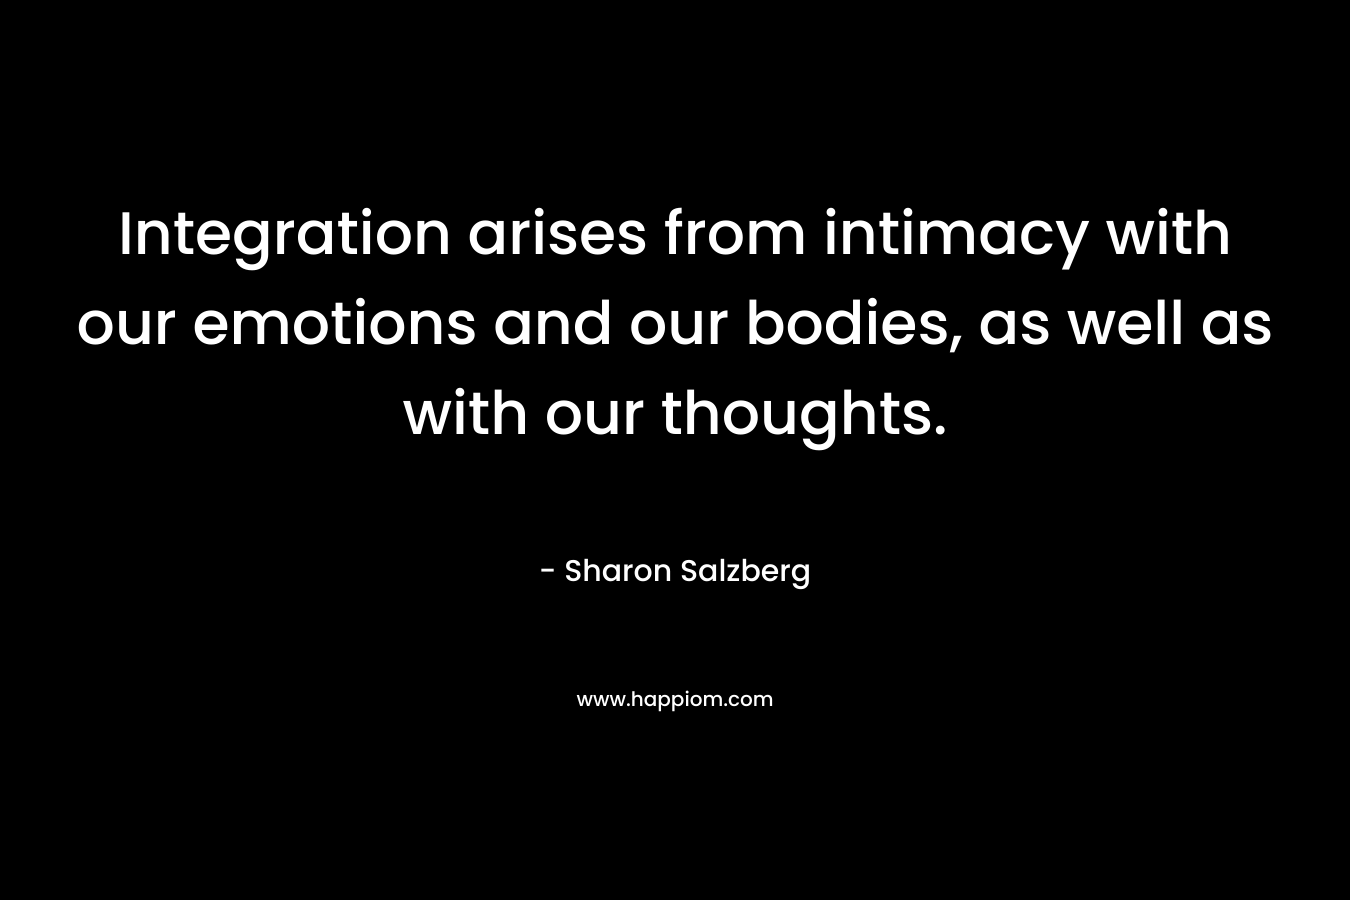 Integration arises from intimacy with our emotions and our bodies, as well as with our thoughts. – Sharon Salzberg